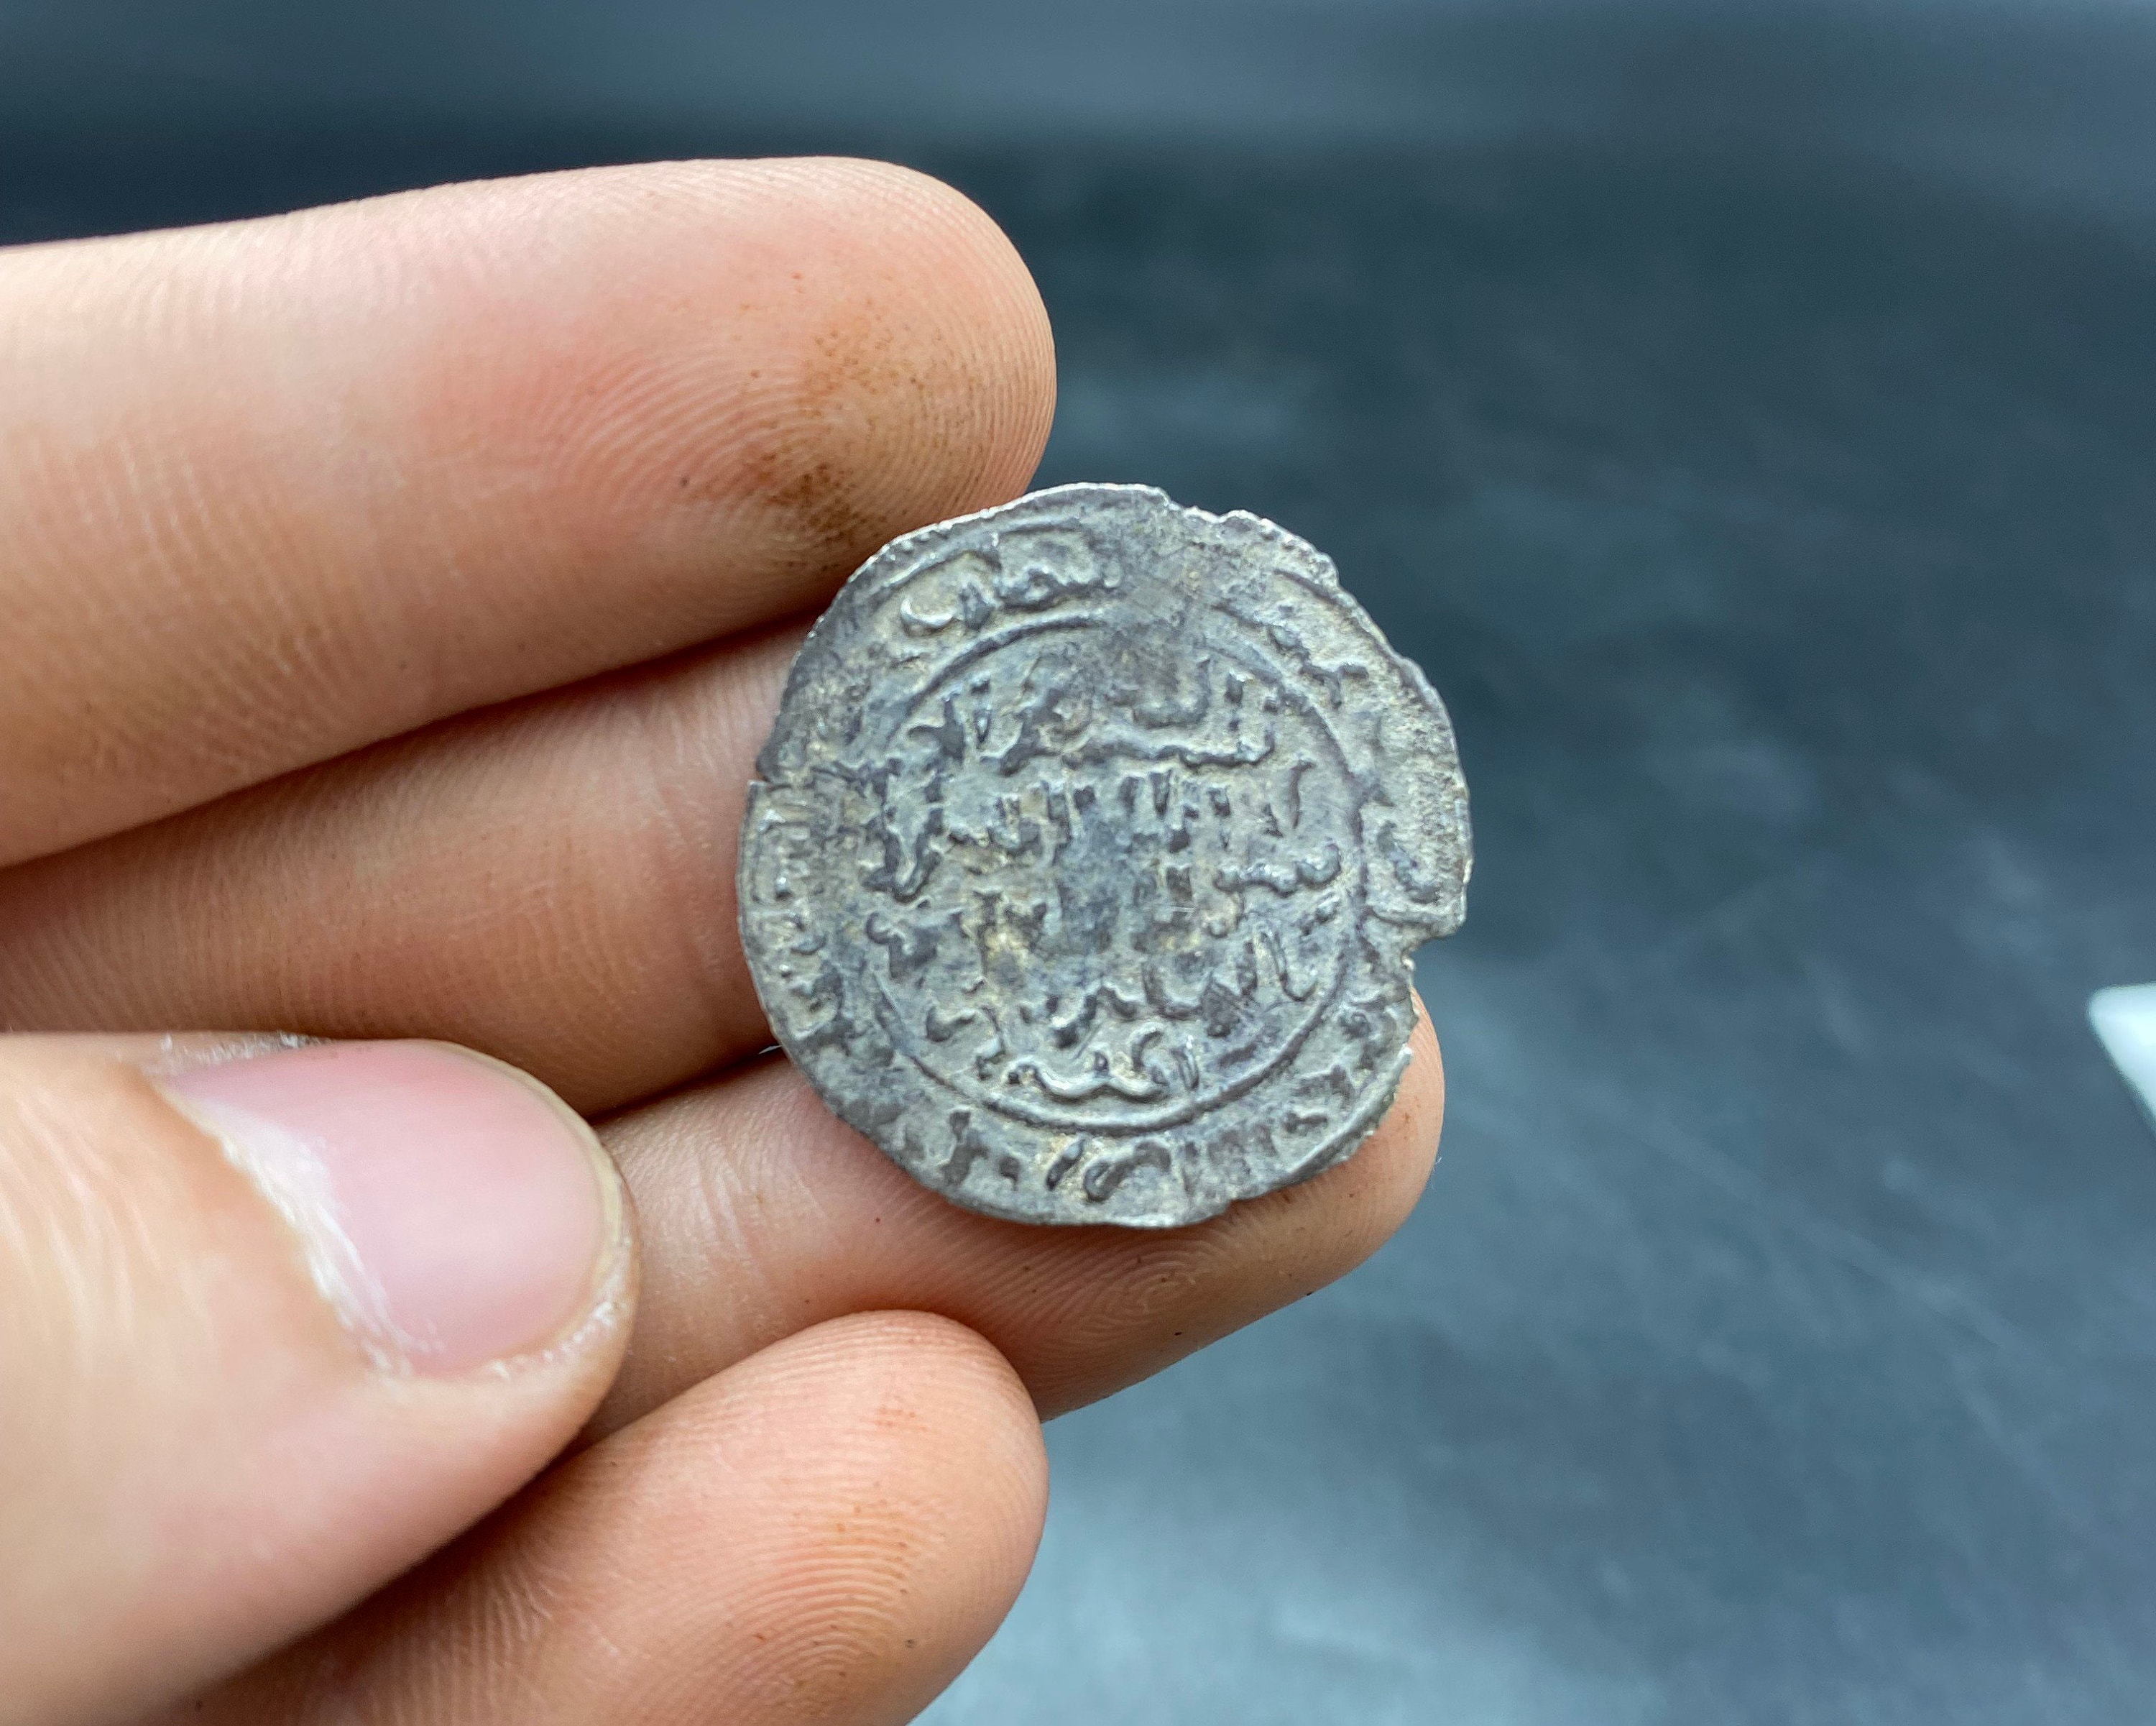 Antique Islamic Coin - Etsy